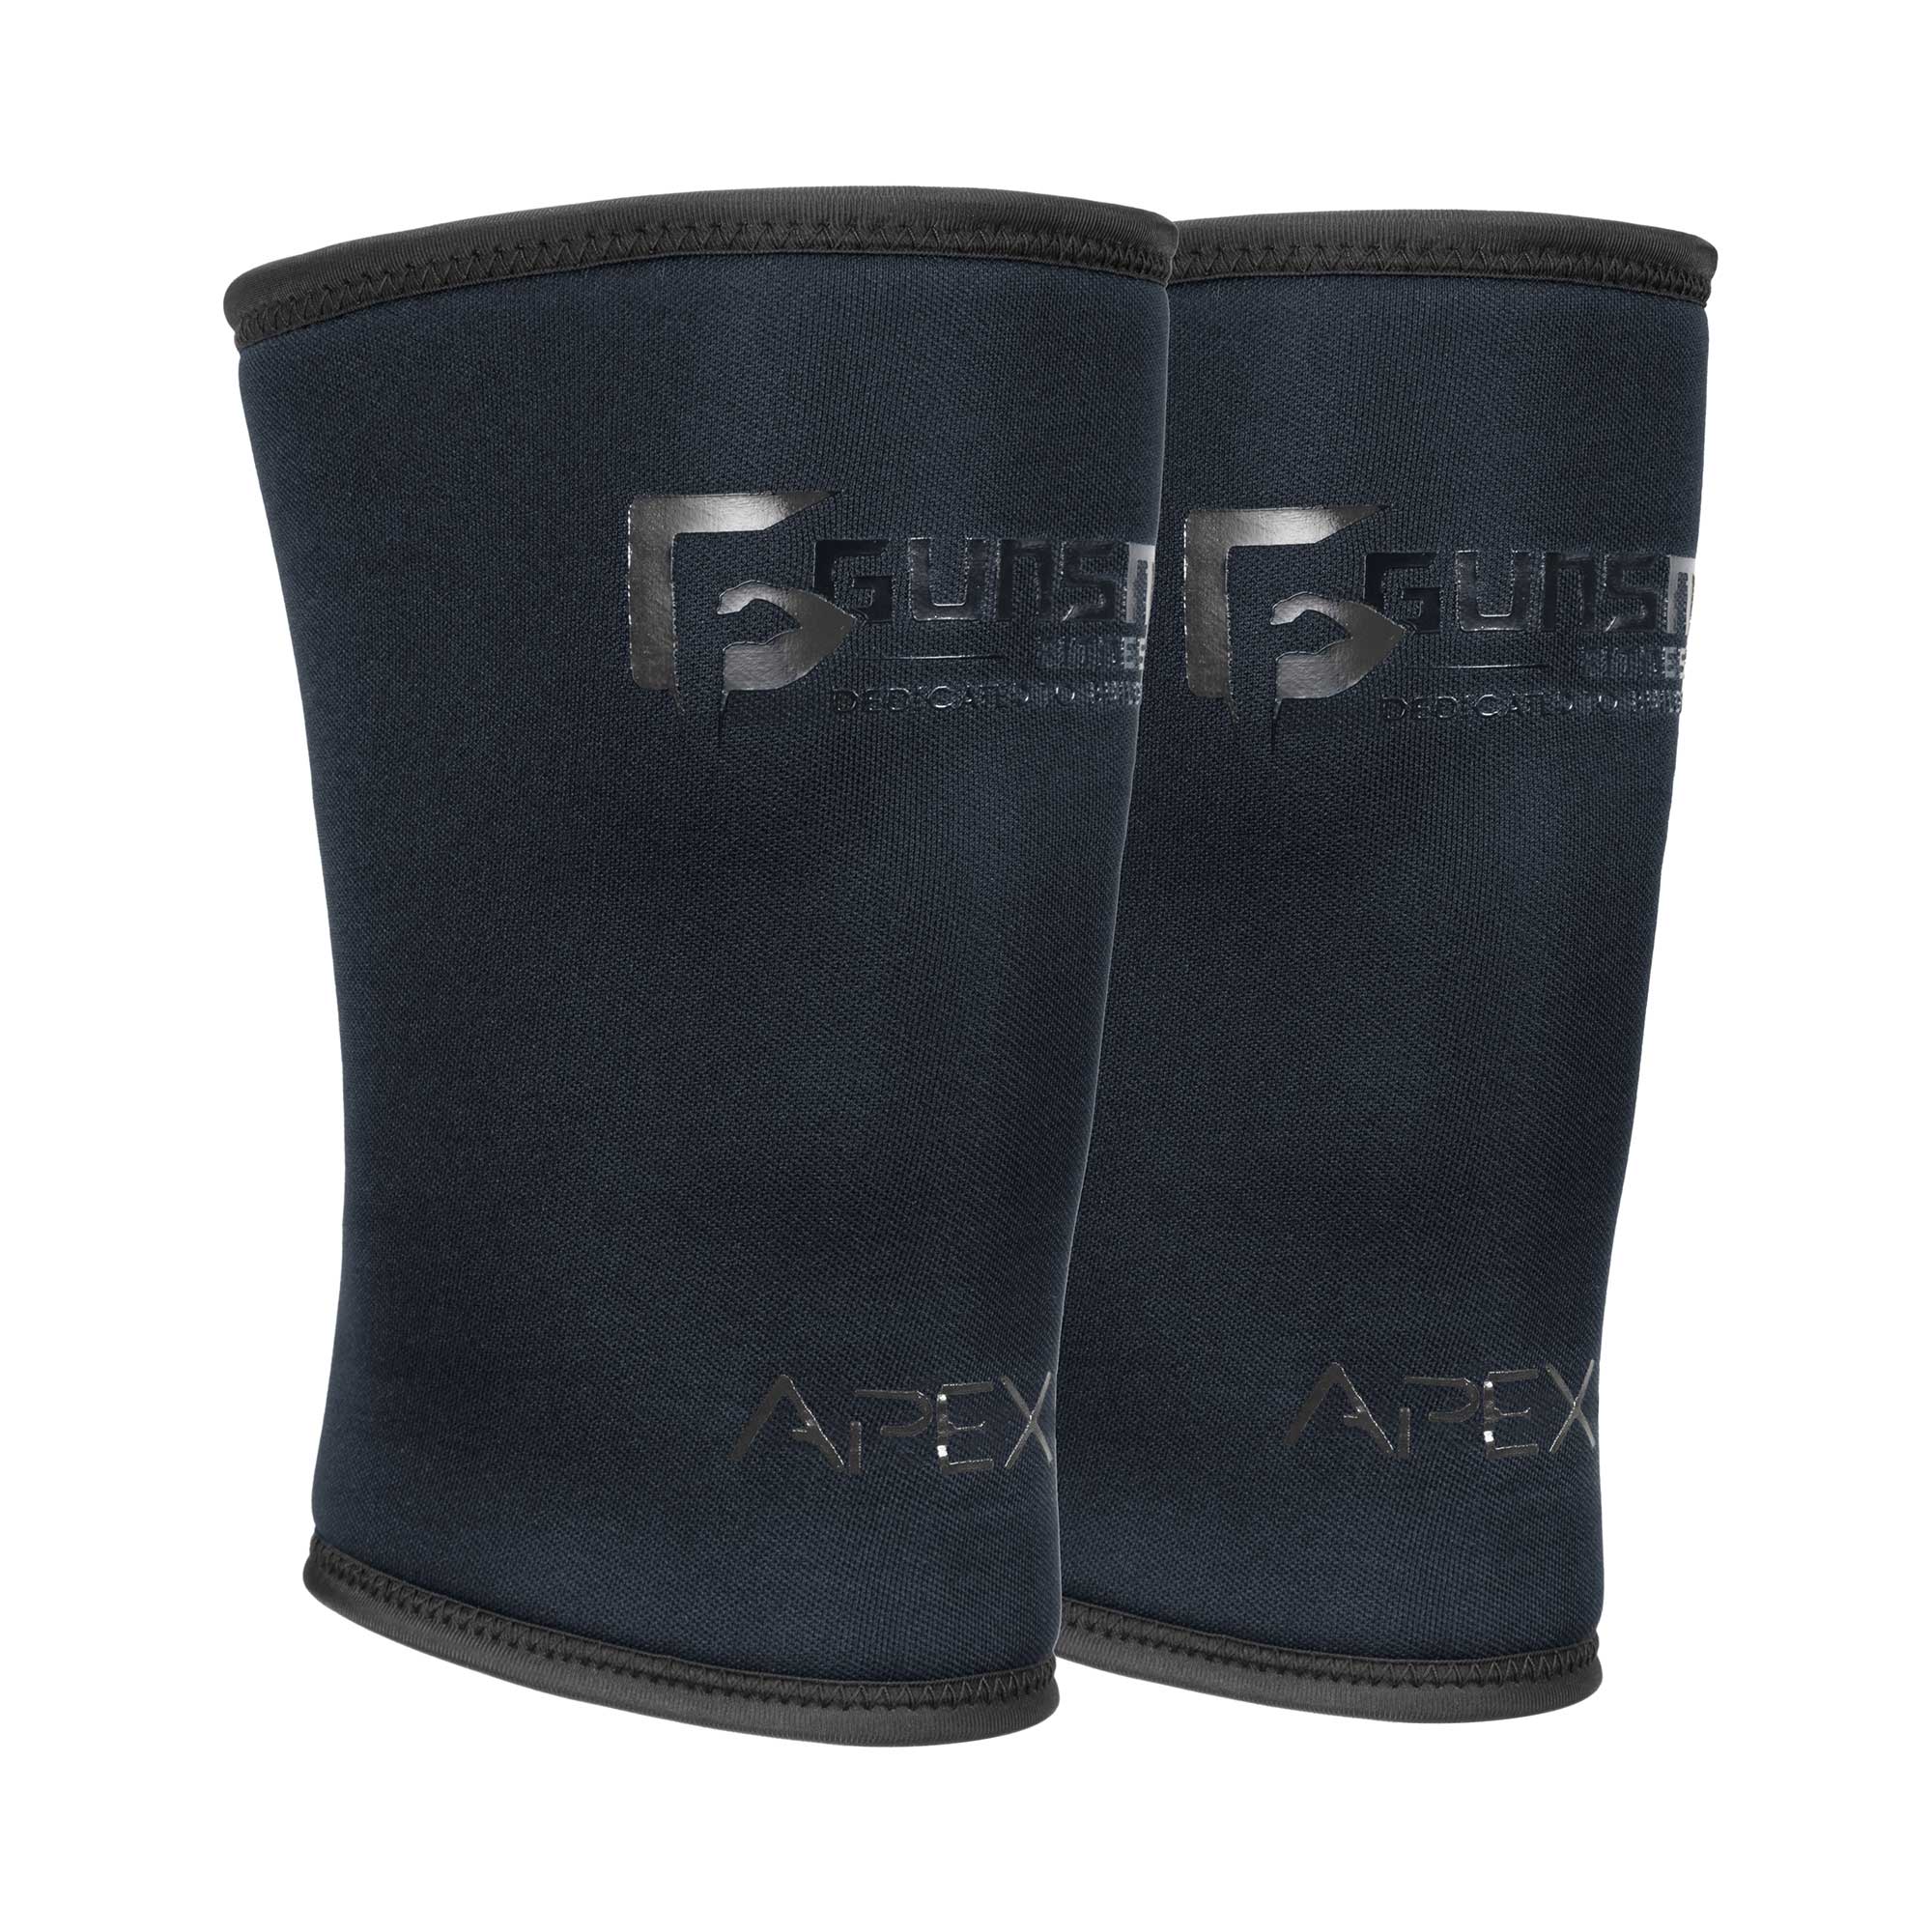 Apex 9mm Compression Knee Sleeves - Gunsmith Fitness